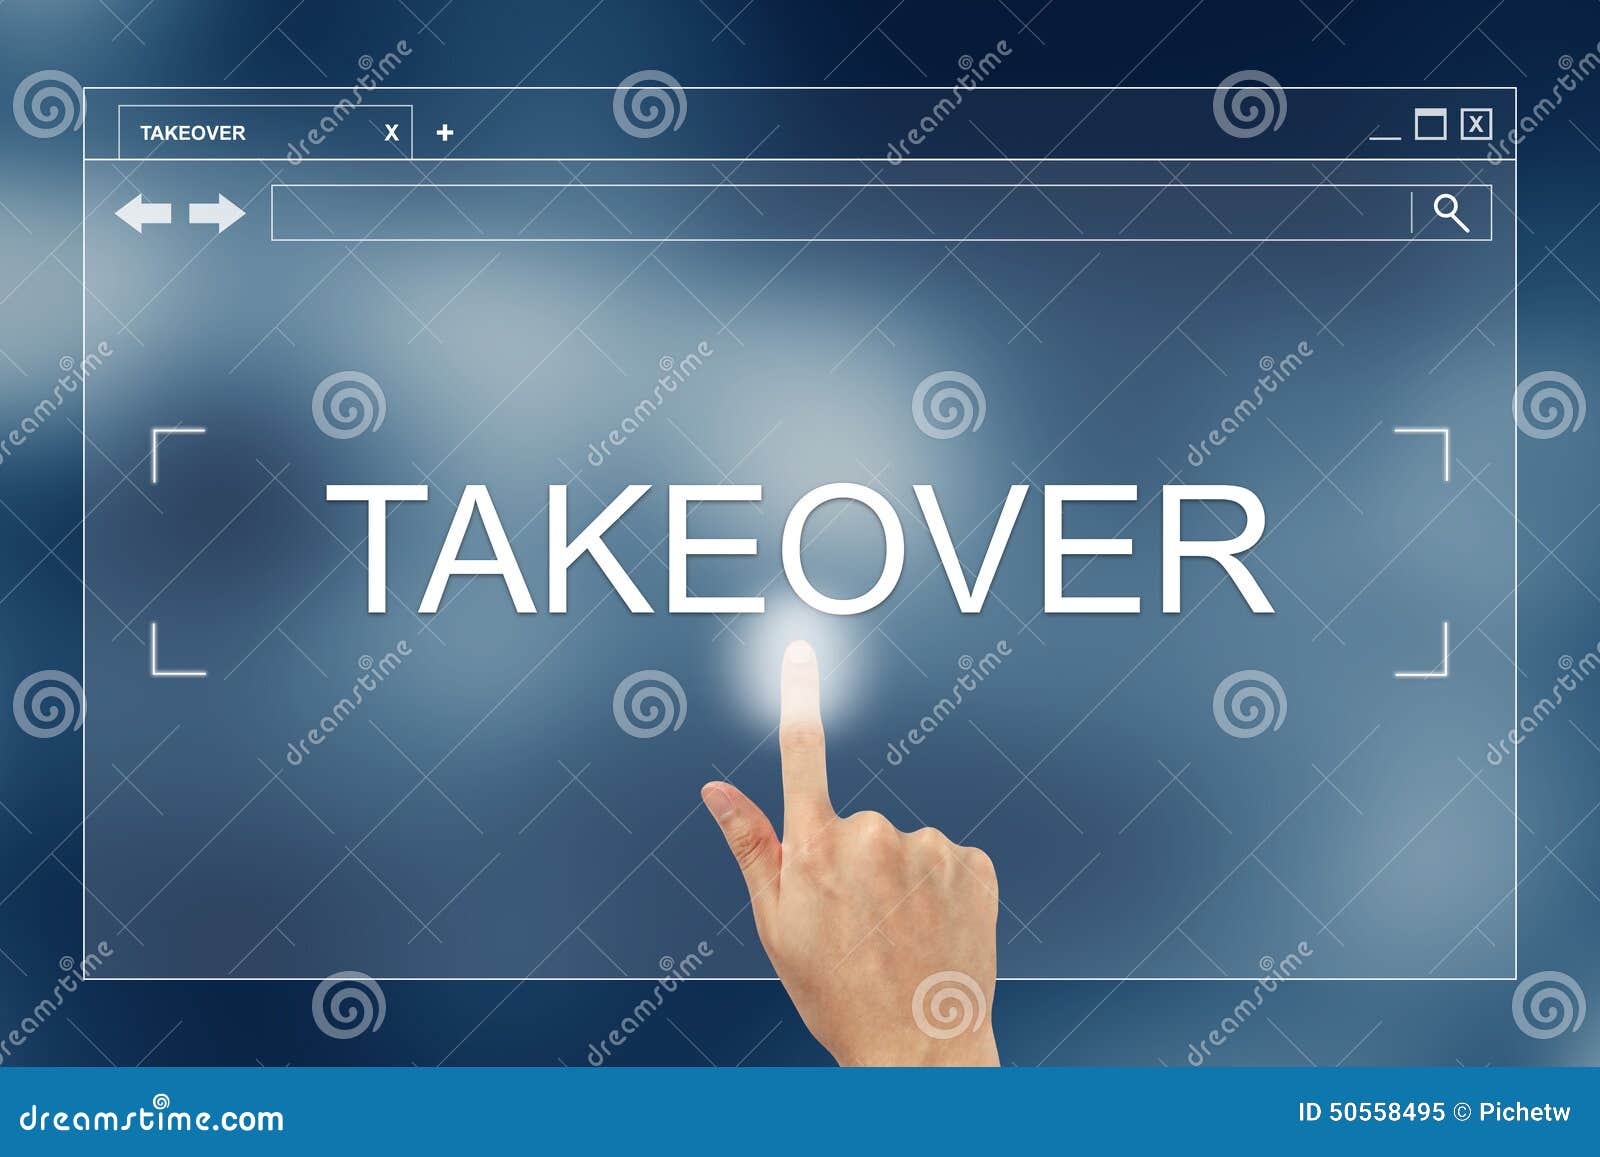 hand press on takeover button on website